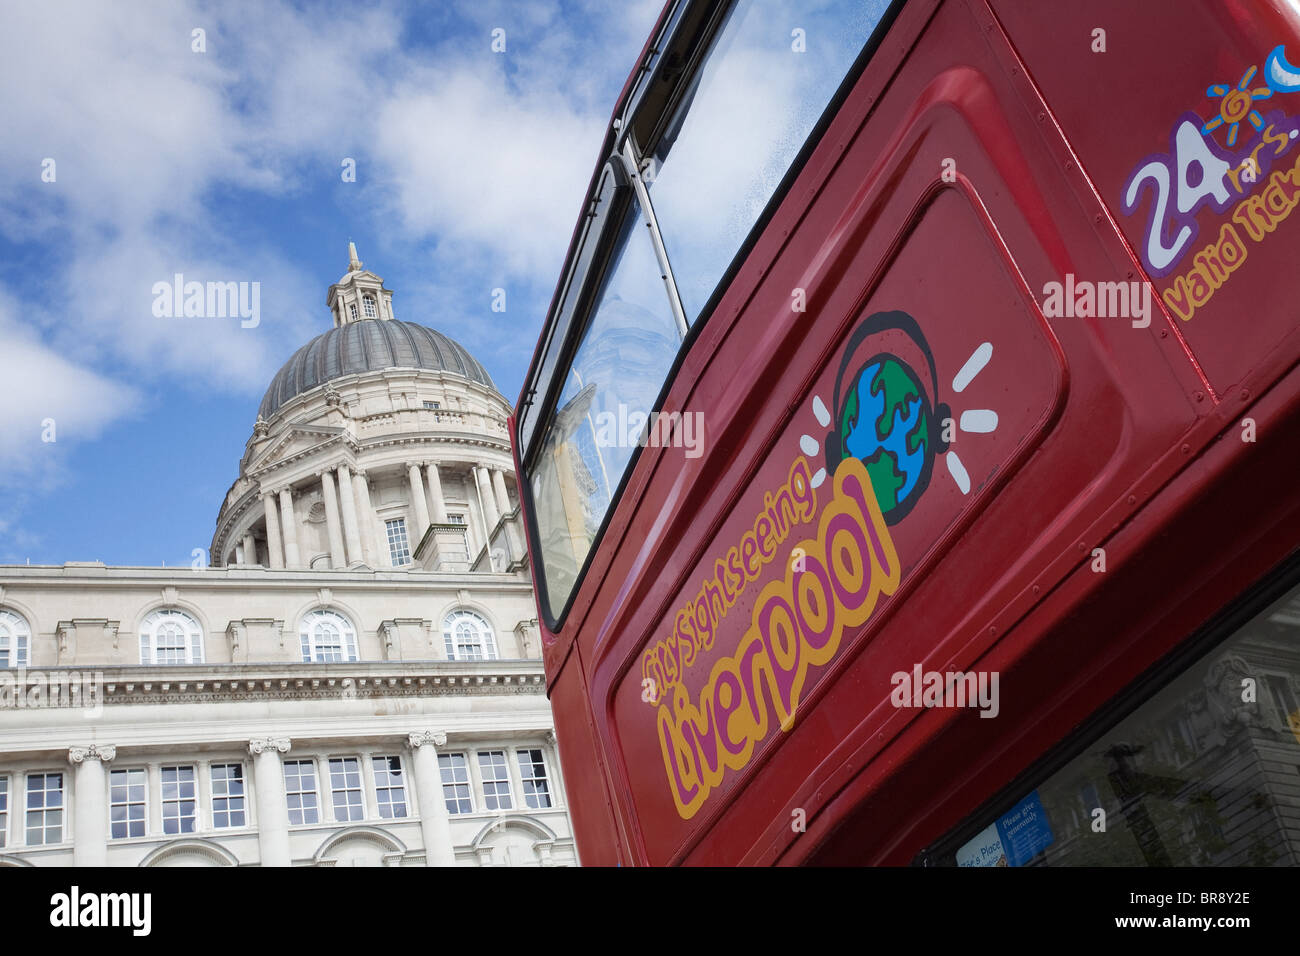 An open topped, red, double decker bus in front of the Port of Liverpool Building in Liverpool Stock Photo